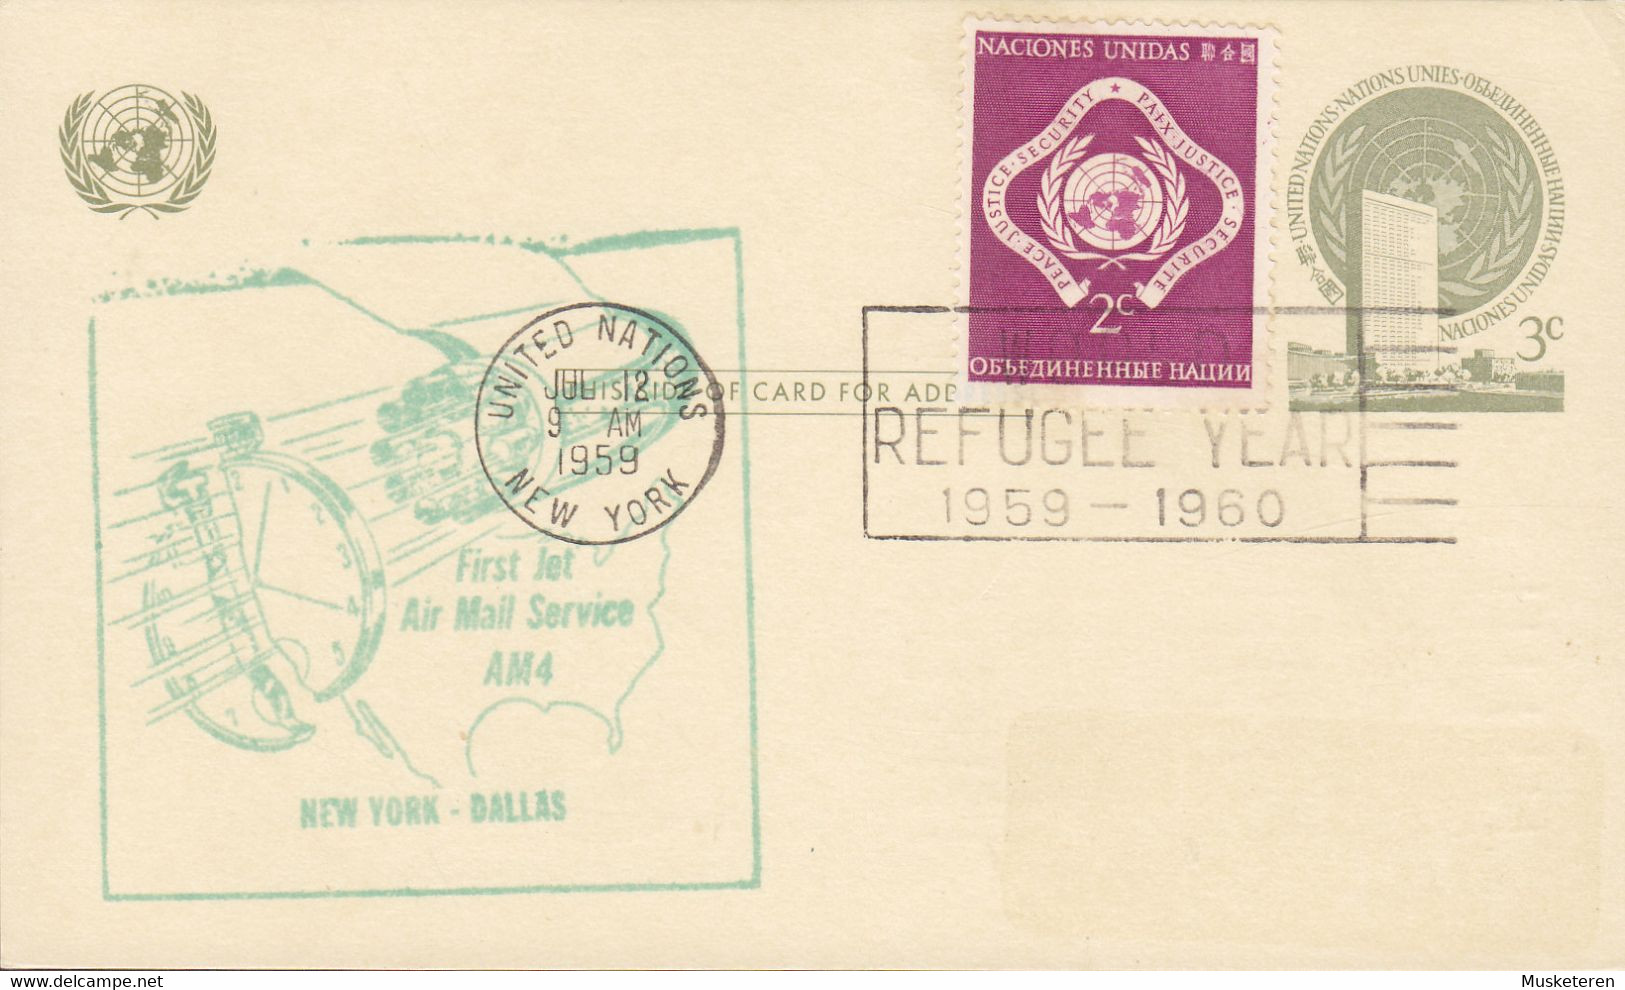 United Nations Uprated Postal Stationery Ganzsache First Jet Air Mail Service Flight NEW YORK - DALLAS, NEW YORK 1959 - Storia Postale